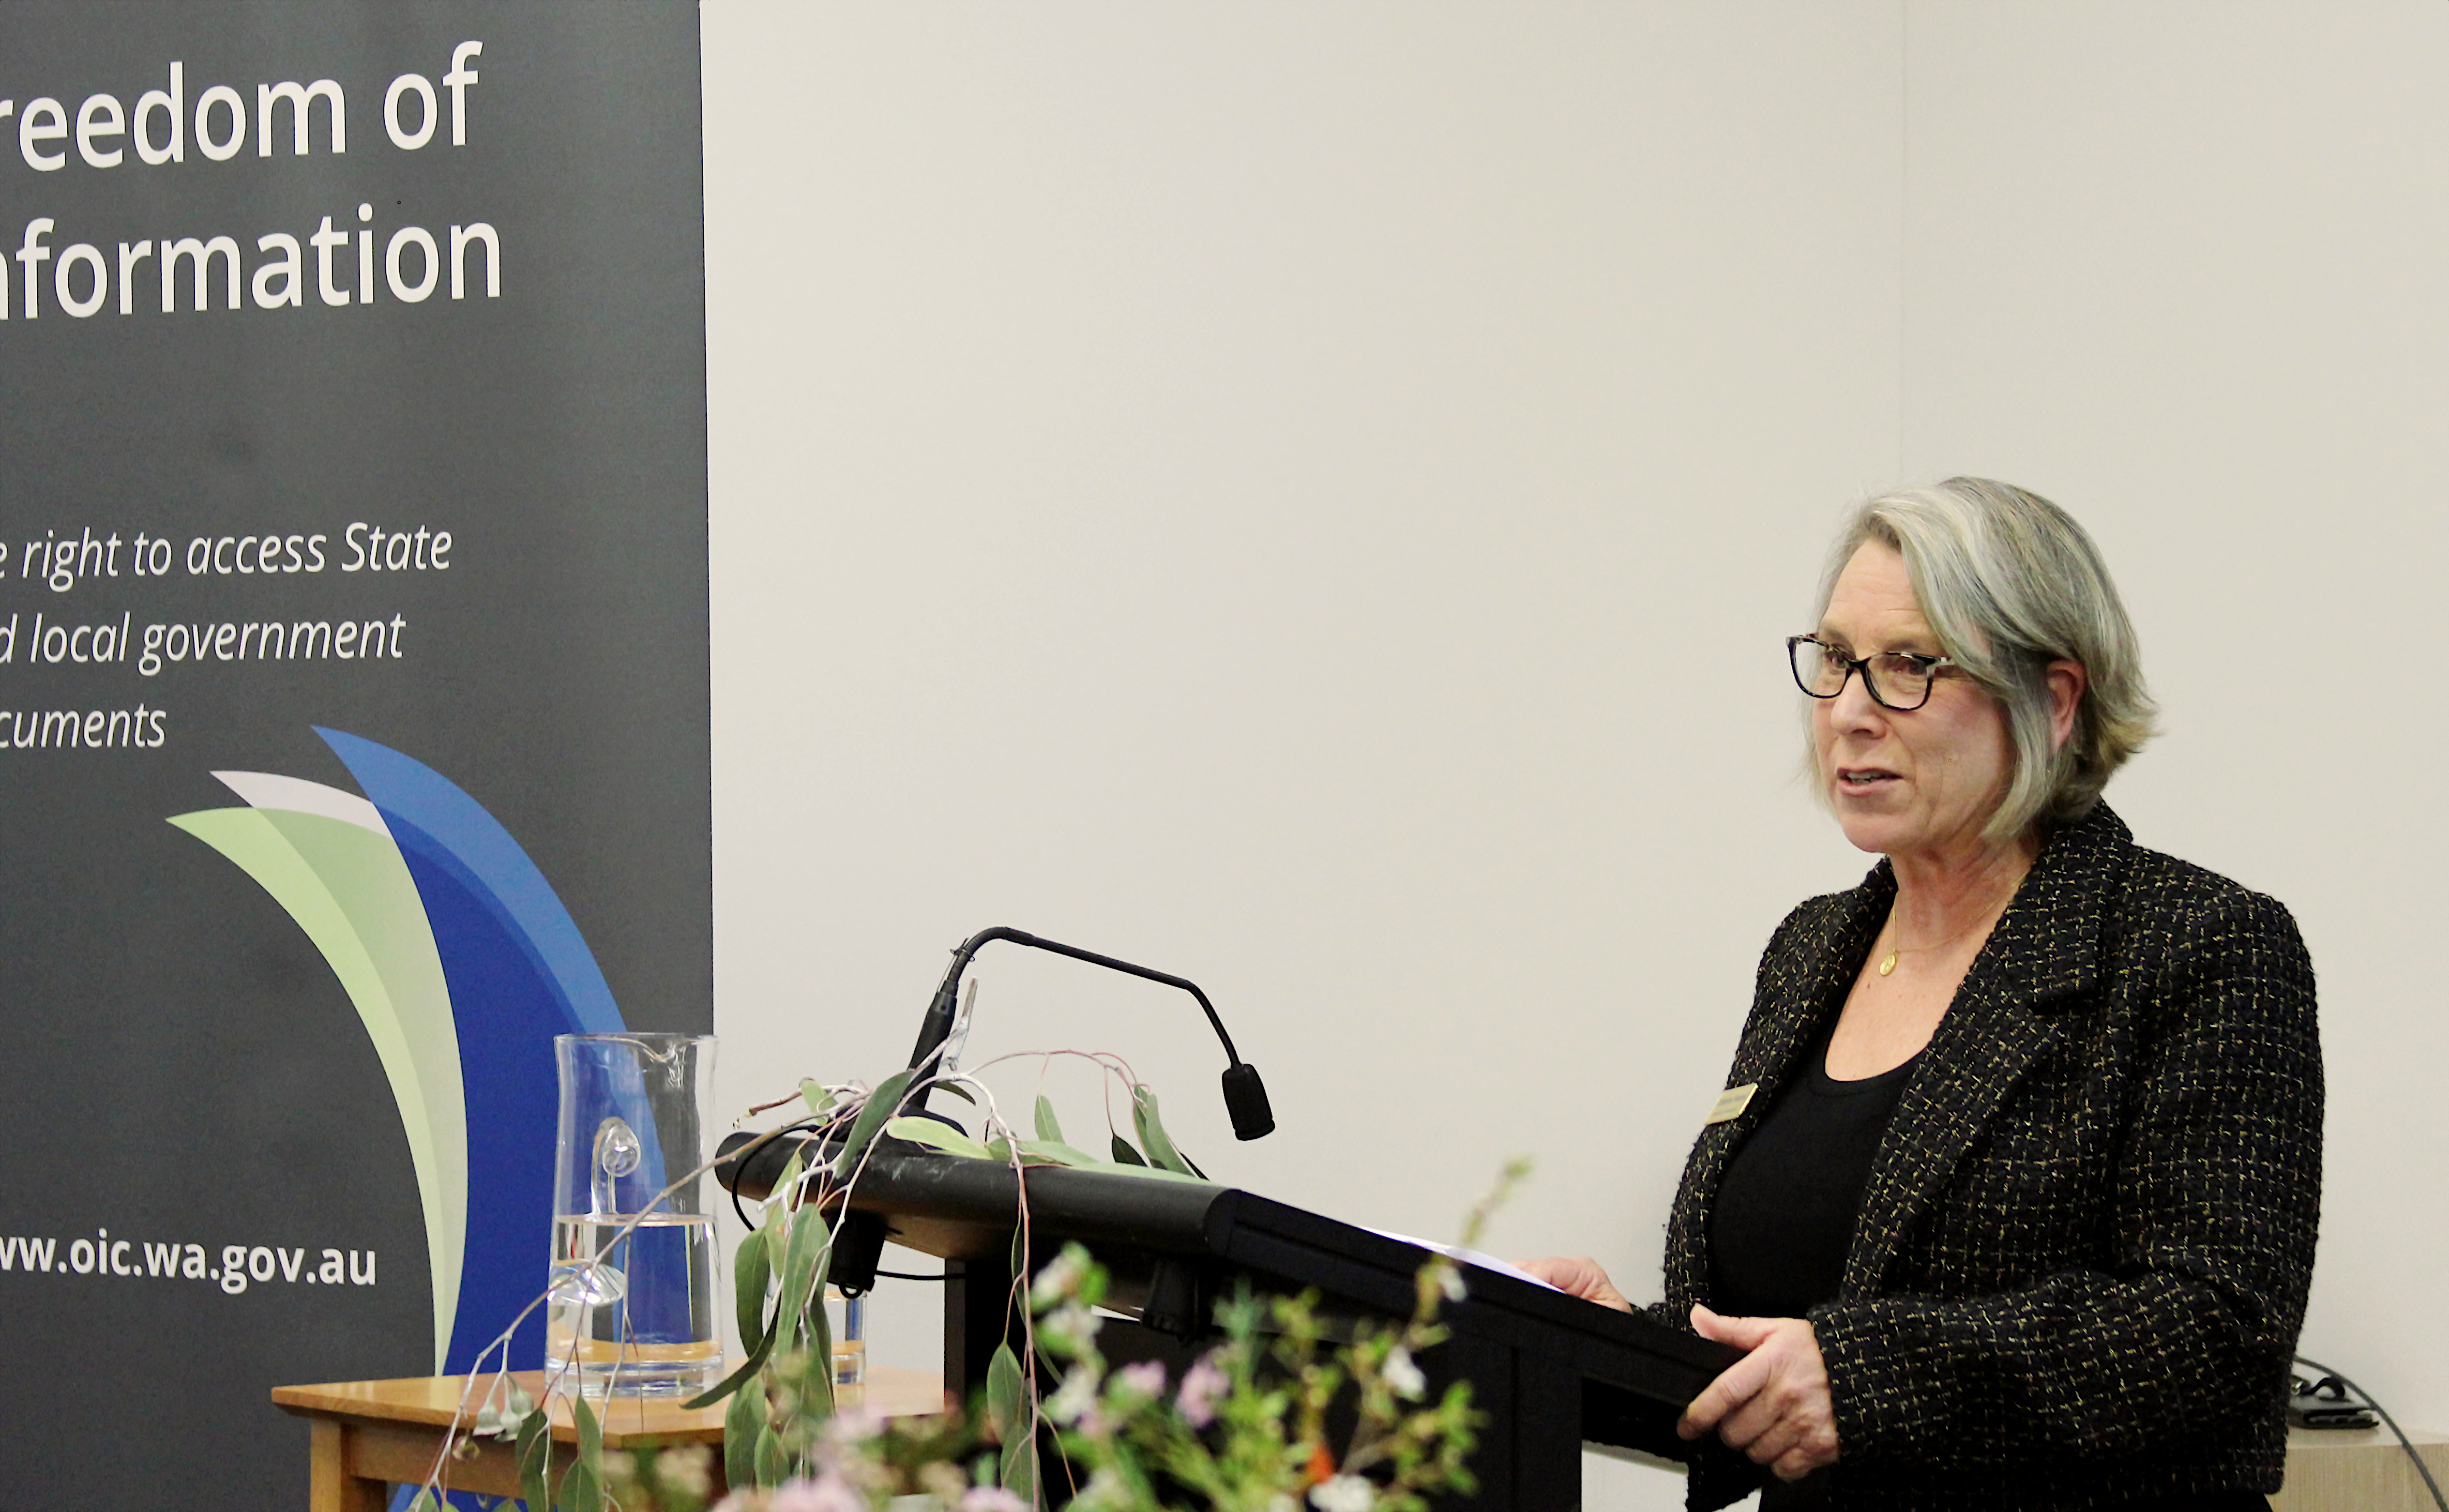 The Information Commissioner speaking at a lectern